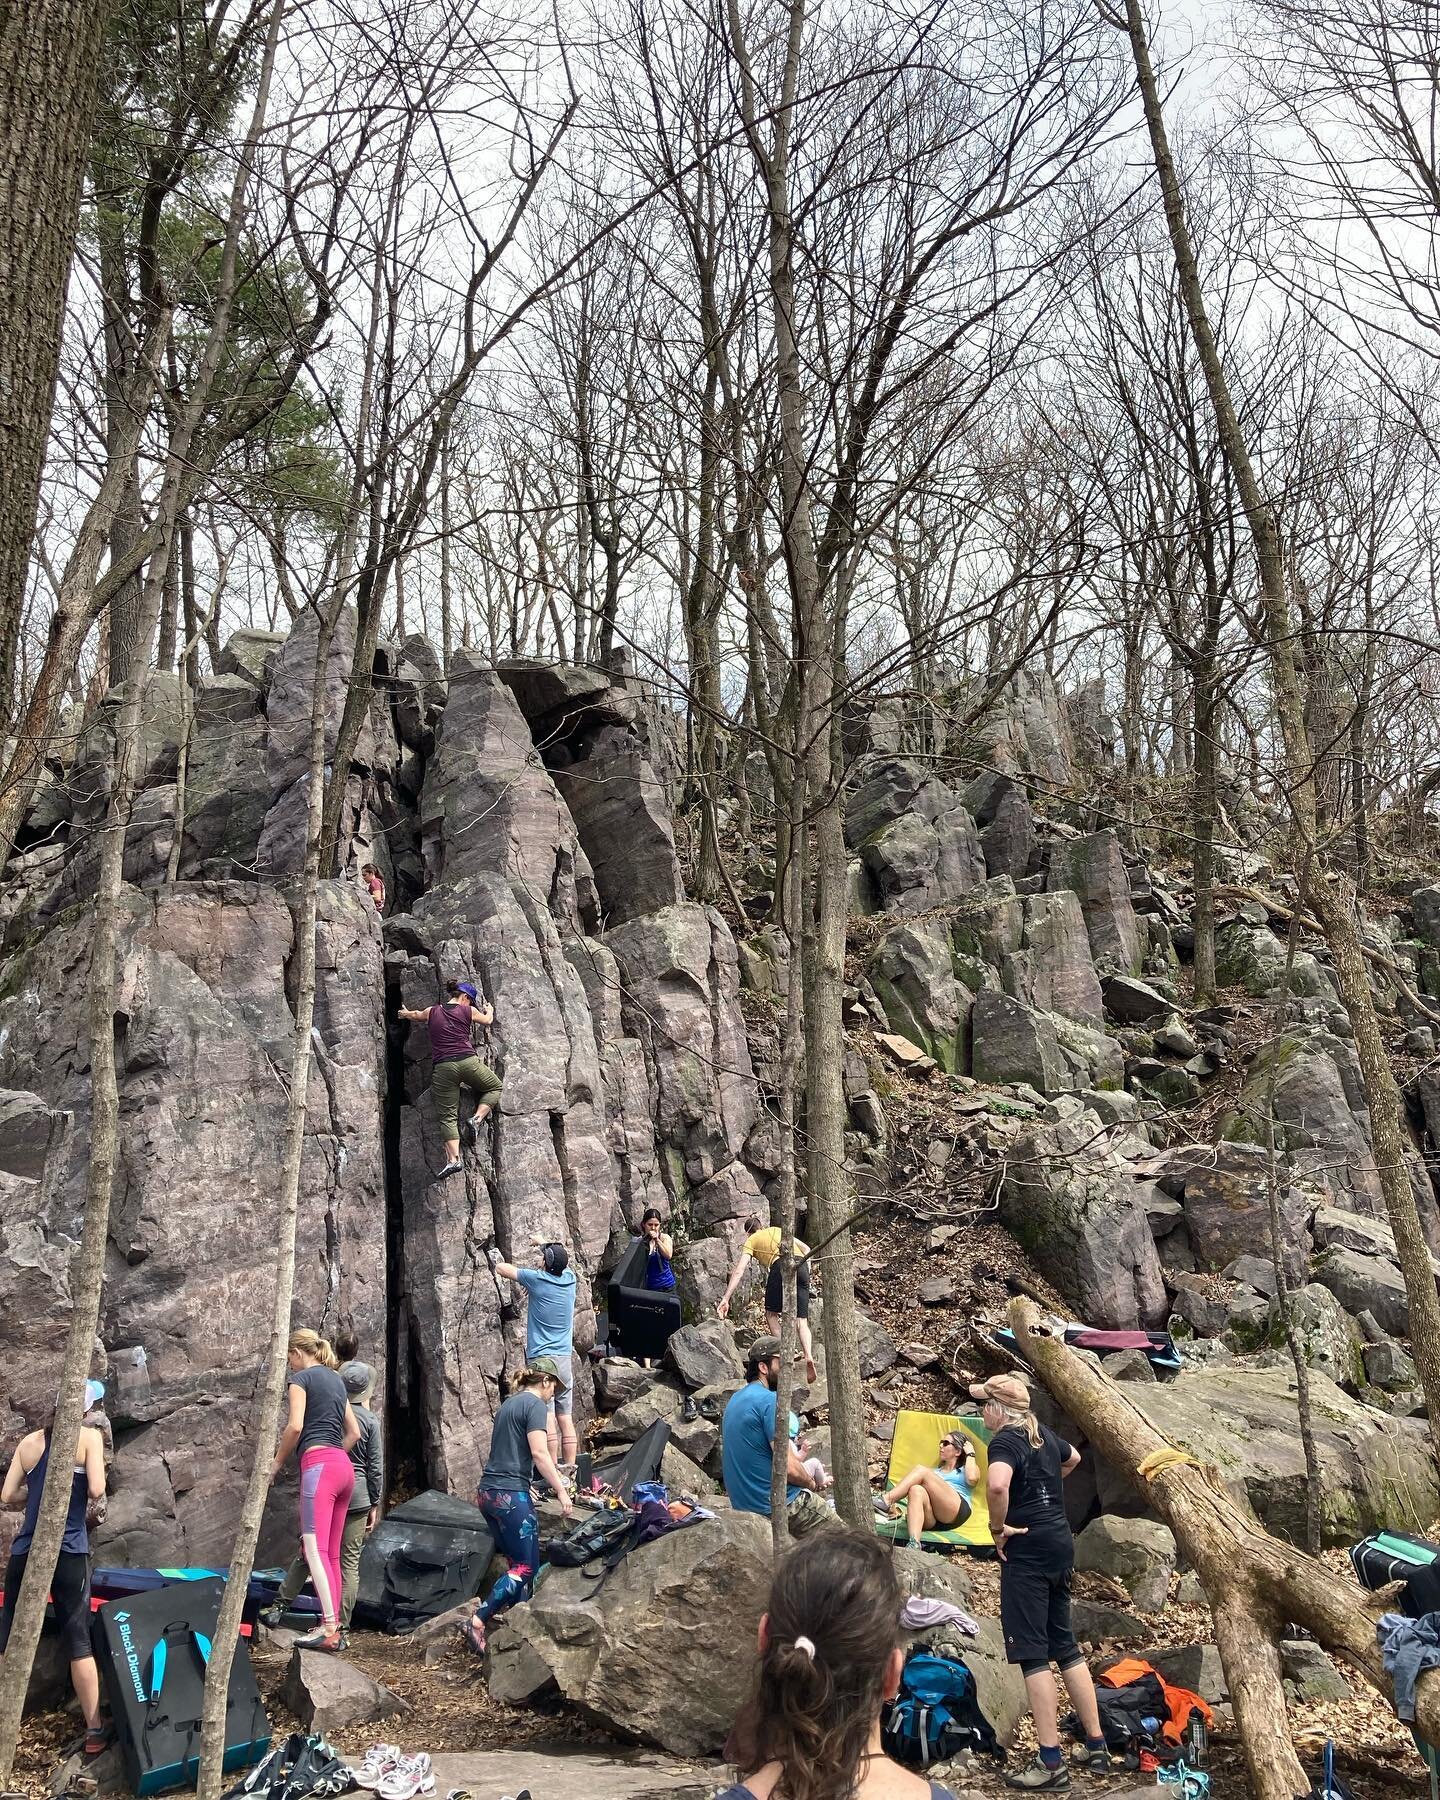 WCA is sponsoring several events this spring and summer. Coming up: a camping and climbing weekend at Devil&rsquo;s Lake State Park on April 28/29!!

Stay tuned for more details on how to sign up to join our group campsite. This might be an especiall